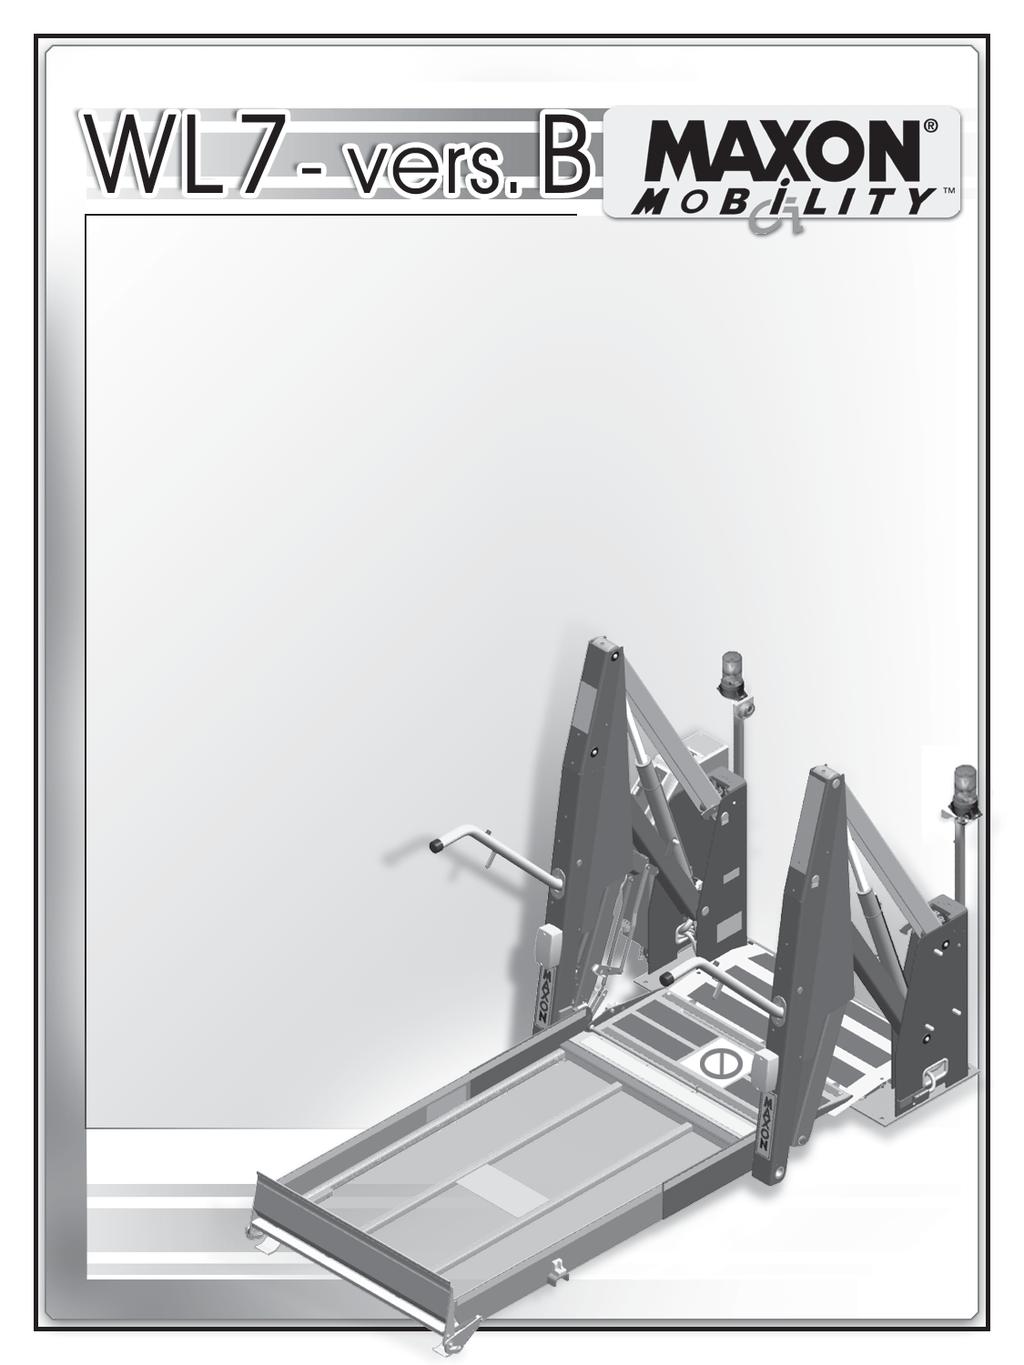 INSTALLATION INSTRUCTIONS FOR WHEELCHAIR LIFT MODEL NO. WL7-vers.